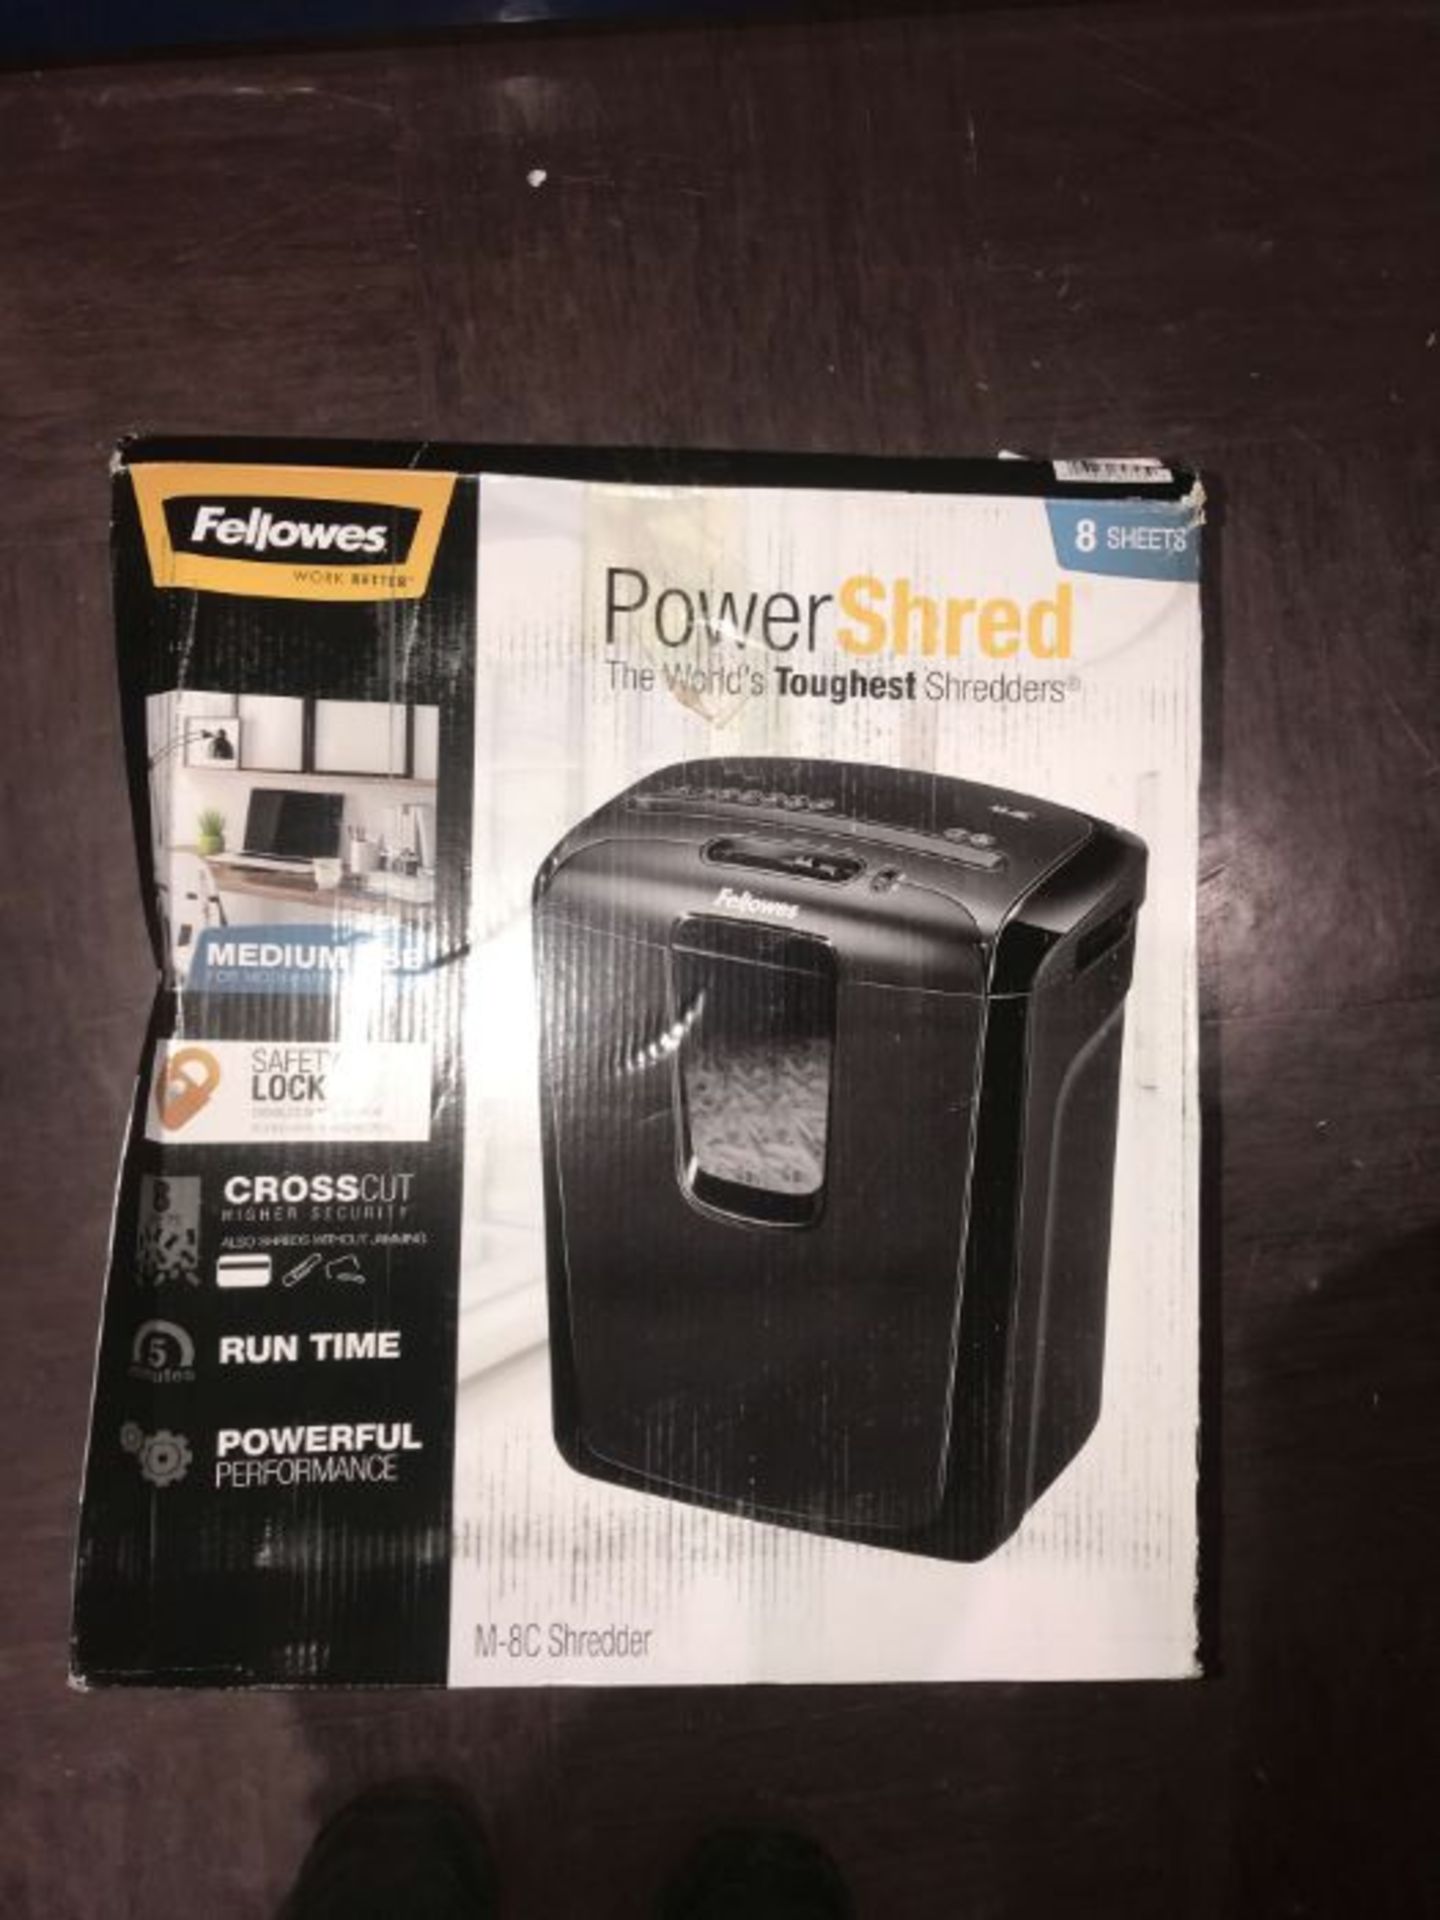 Fellowes Powershred M-8C 8 Sheet Cross Cut Personal Shredder With Safety Lock, Black - Image 2 of 2